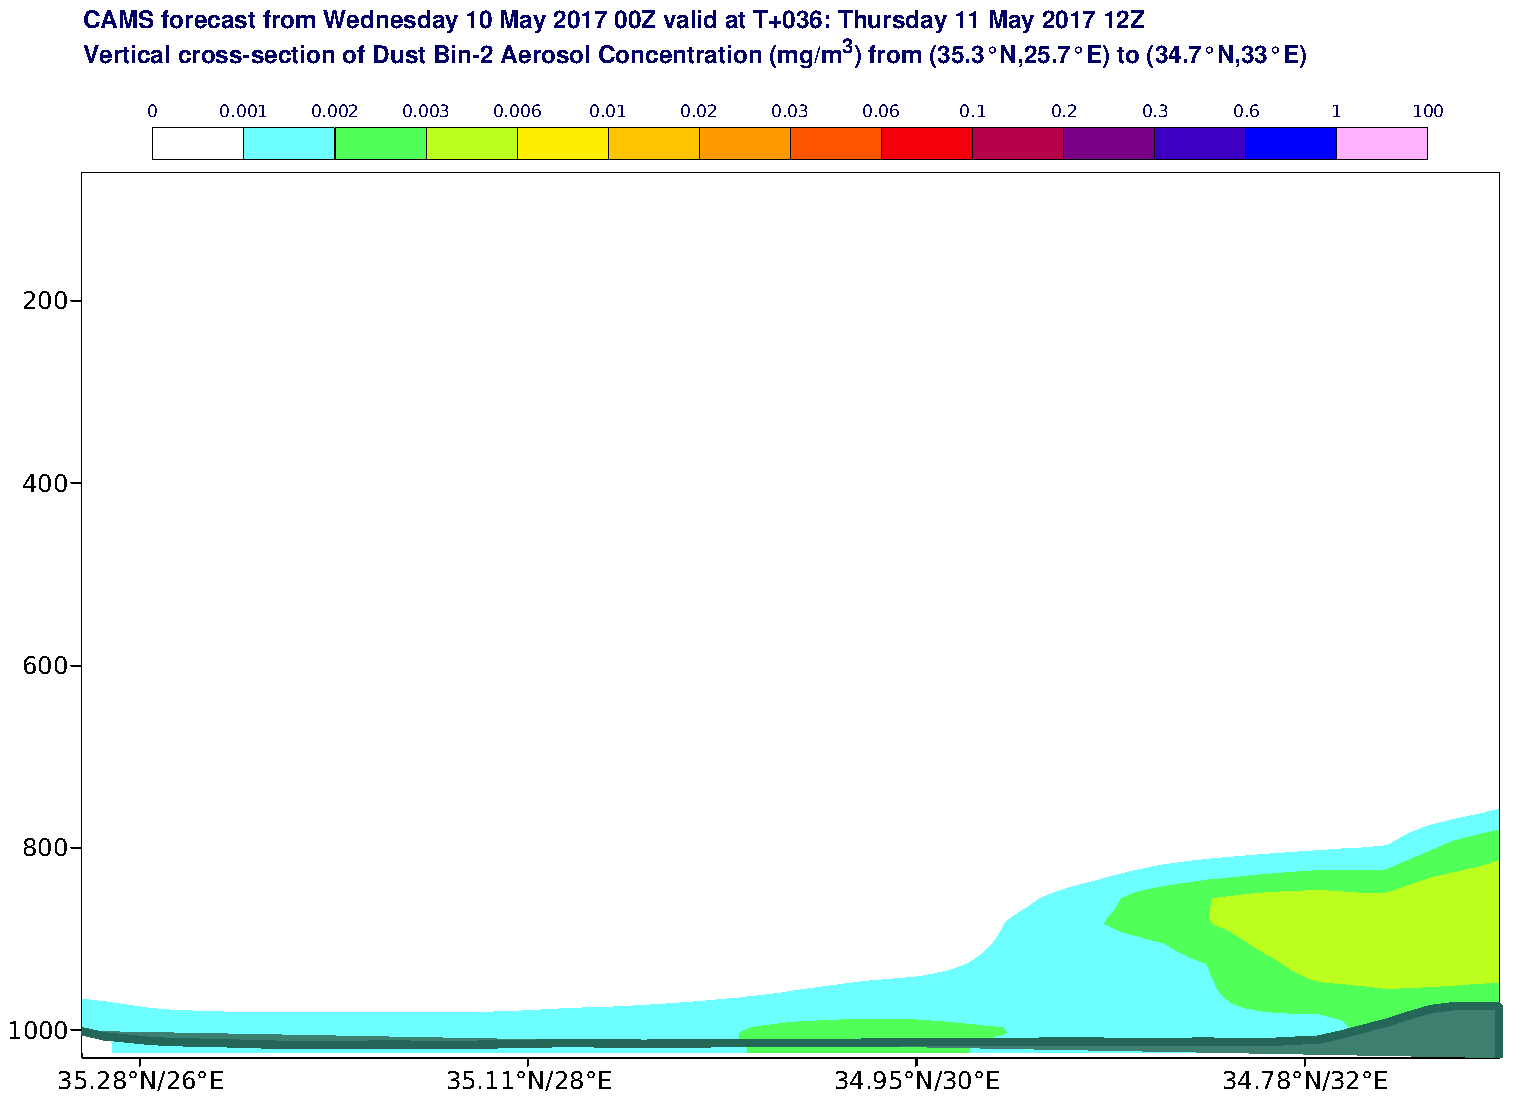 Vertical cross-section of Dust Bin-2 Aerosol Concentration (mg/m3) valid at T36 - 2017-05-11 12:00